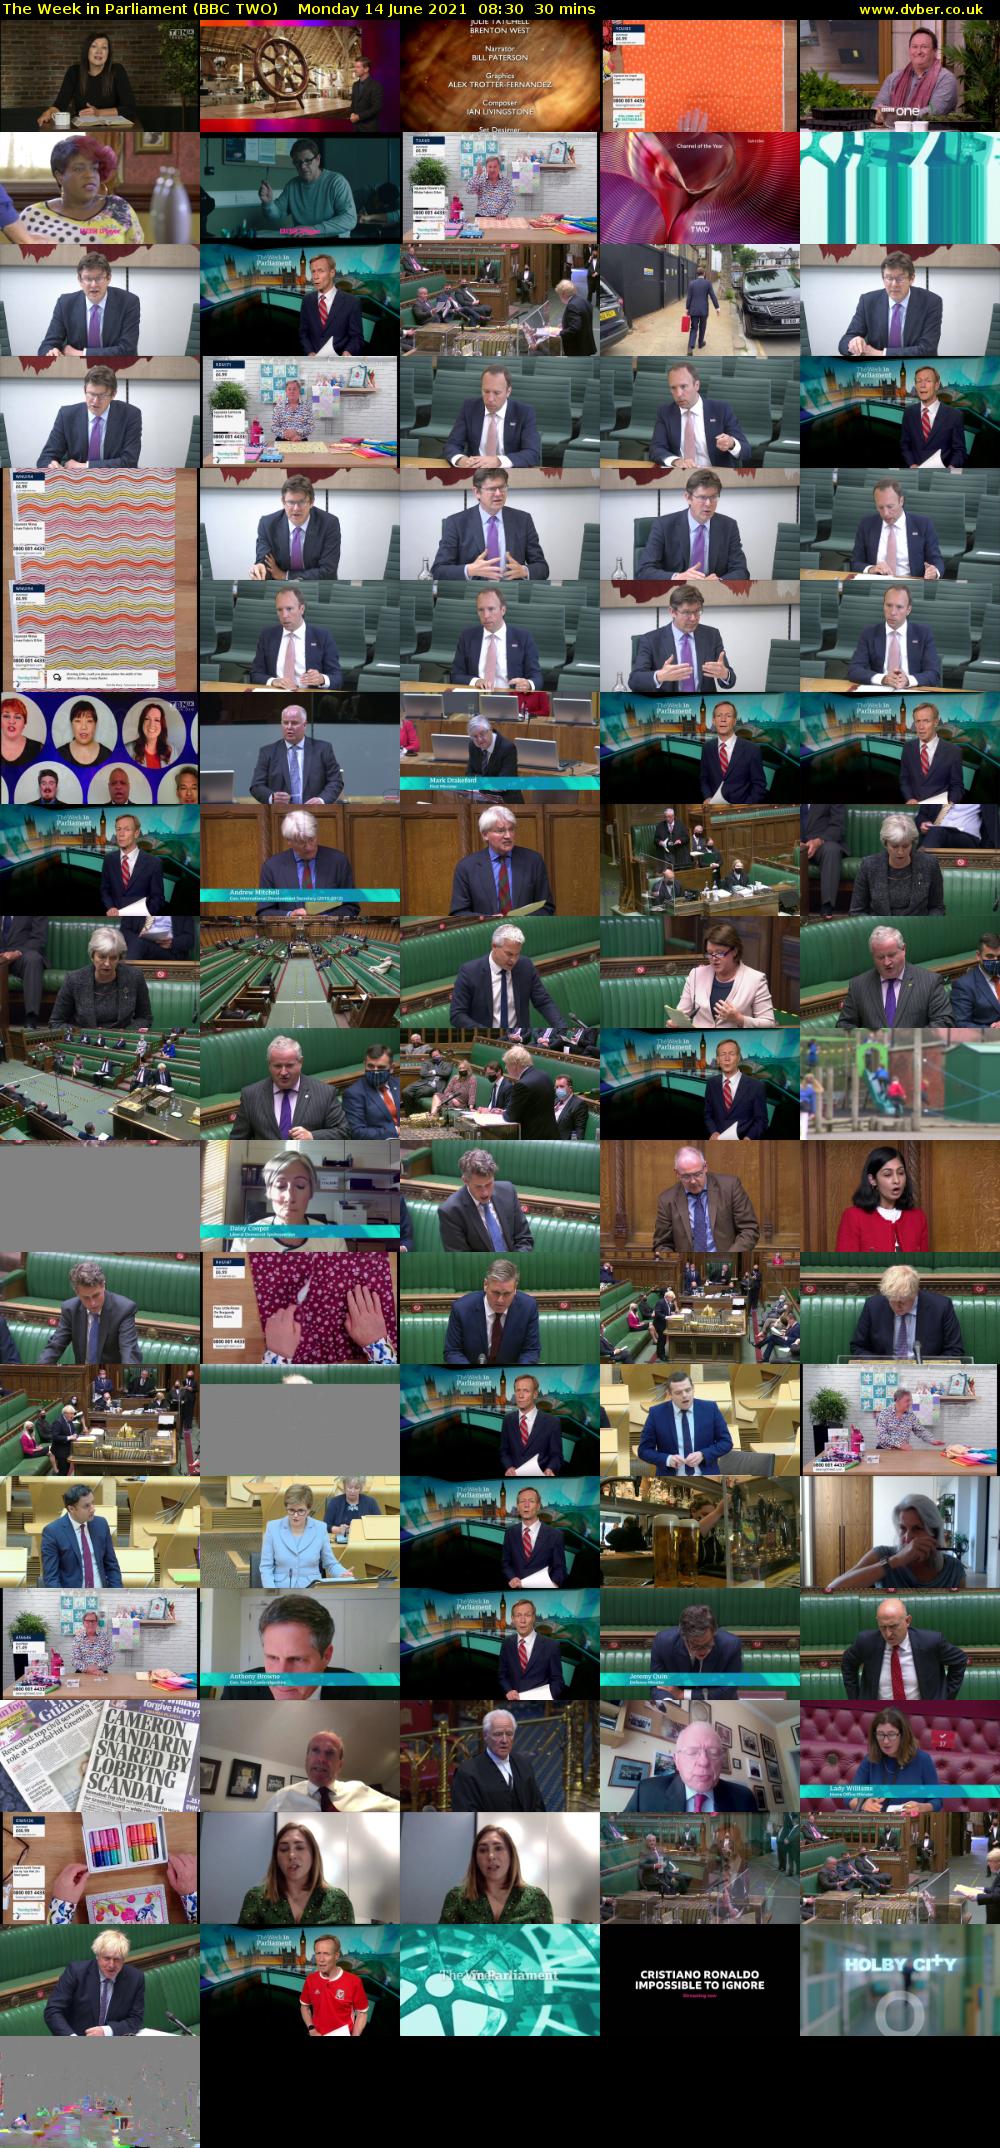 The Week in Parliament (BBC TWO) Monday 14 June 2021 08:30 - 09:00